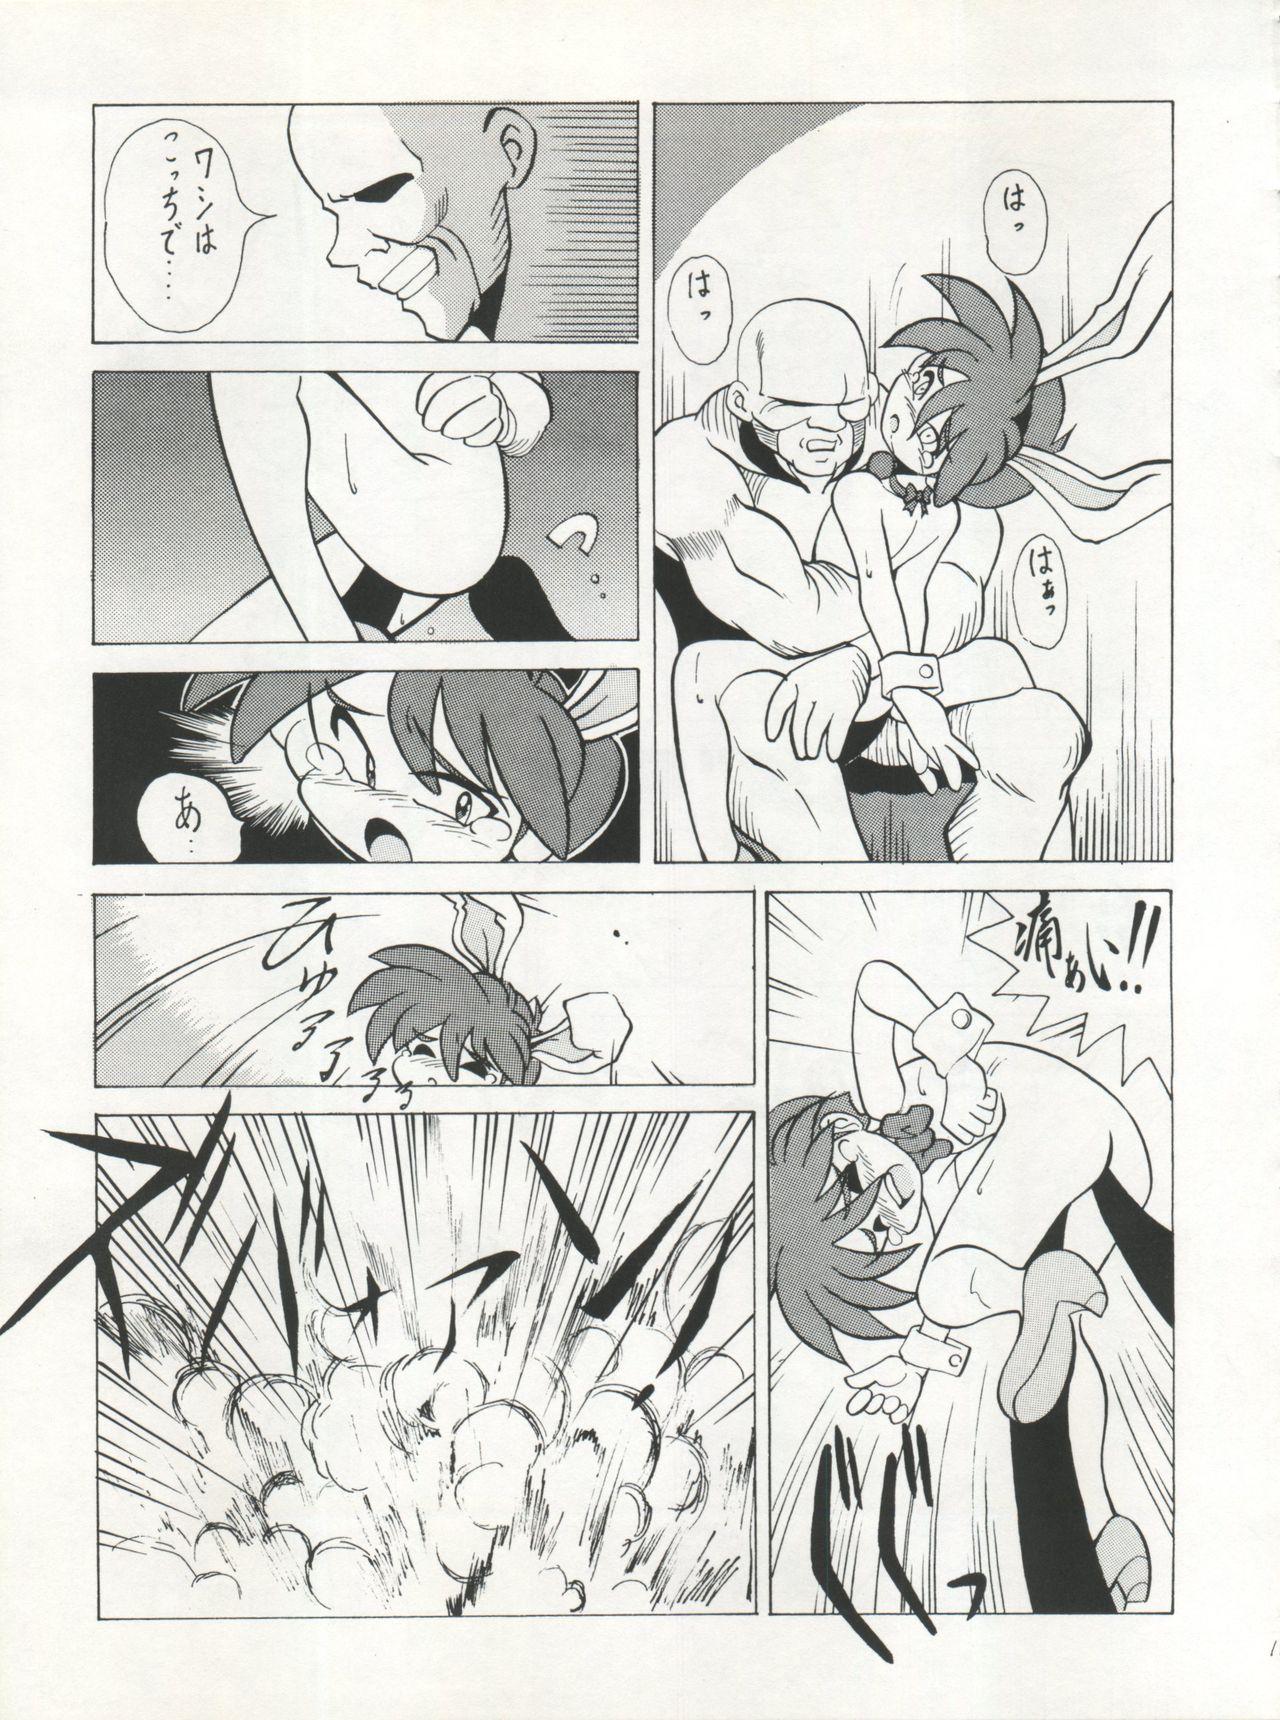 Snatch SAMPLE Vol. 5 - Gunsmith cats Heidi girl of the alps Missionary Porn - Page 11